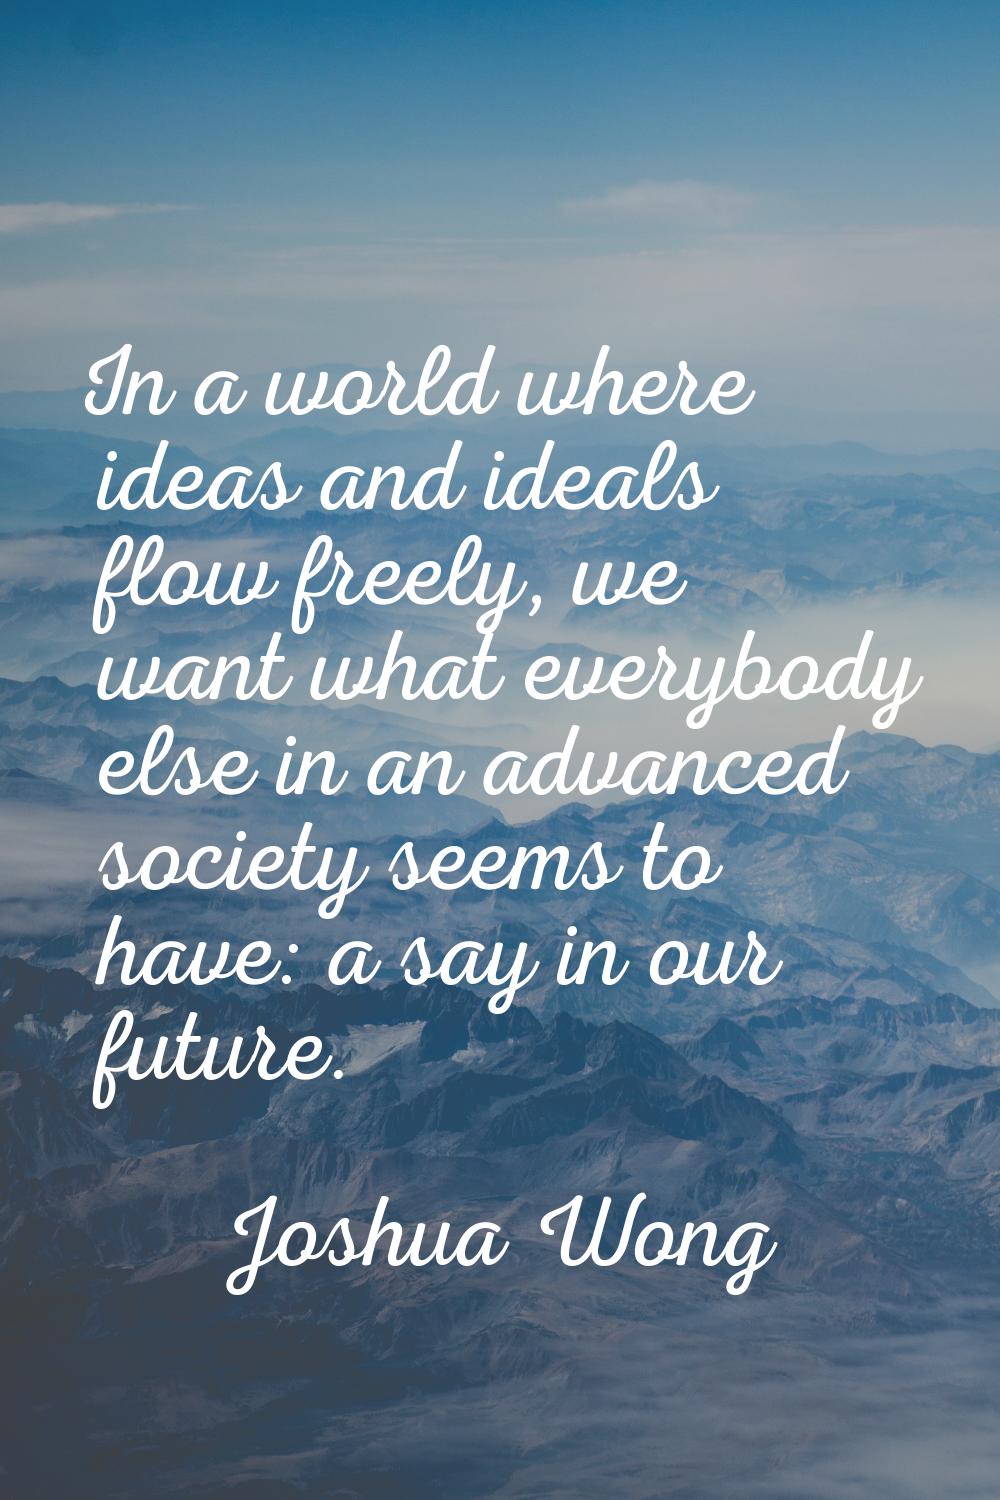 In a world where ideas and ideals flow freely, we want what everybody else in an advanced society s